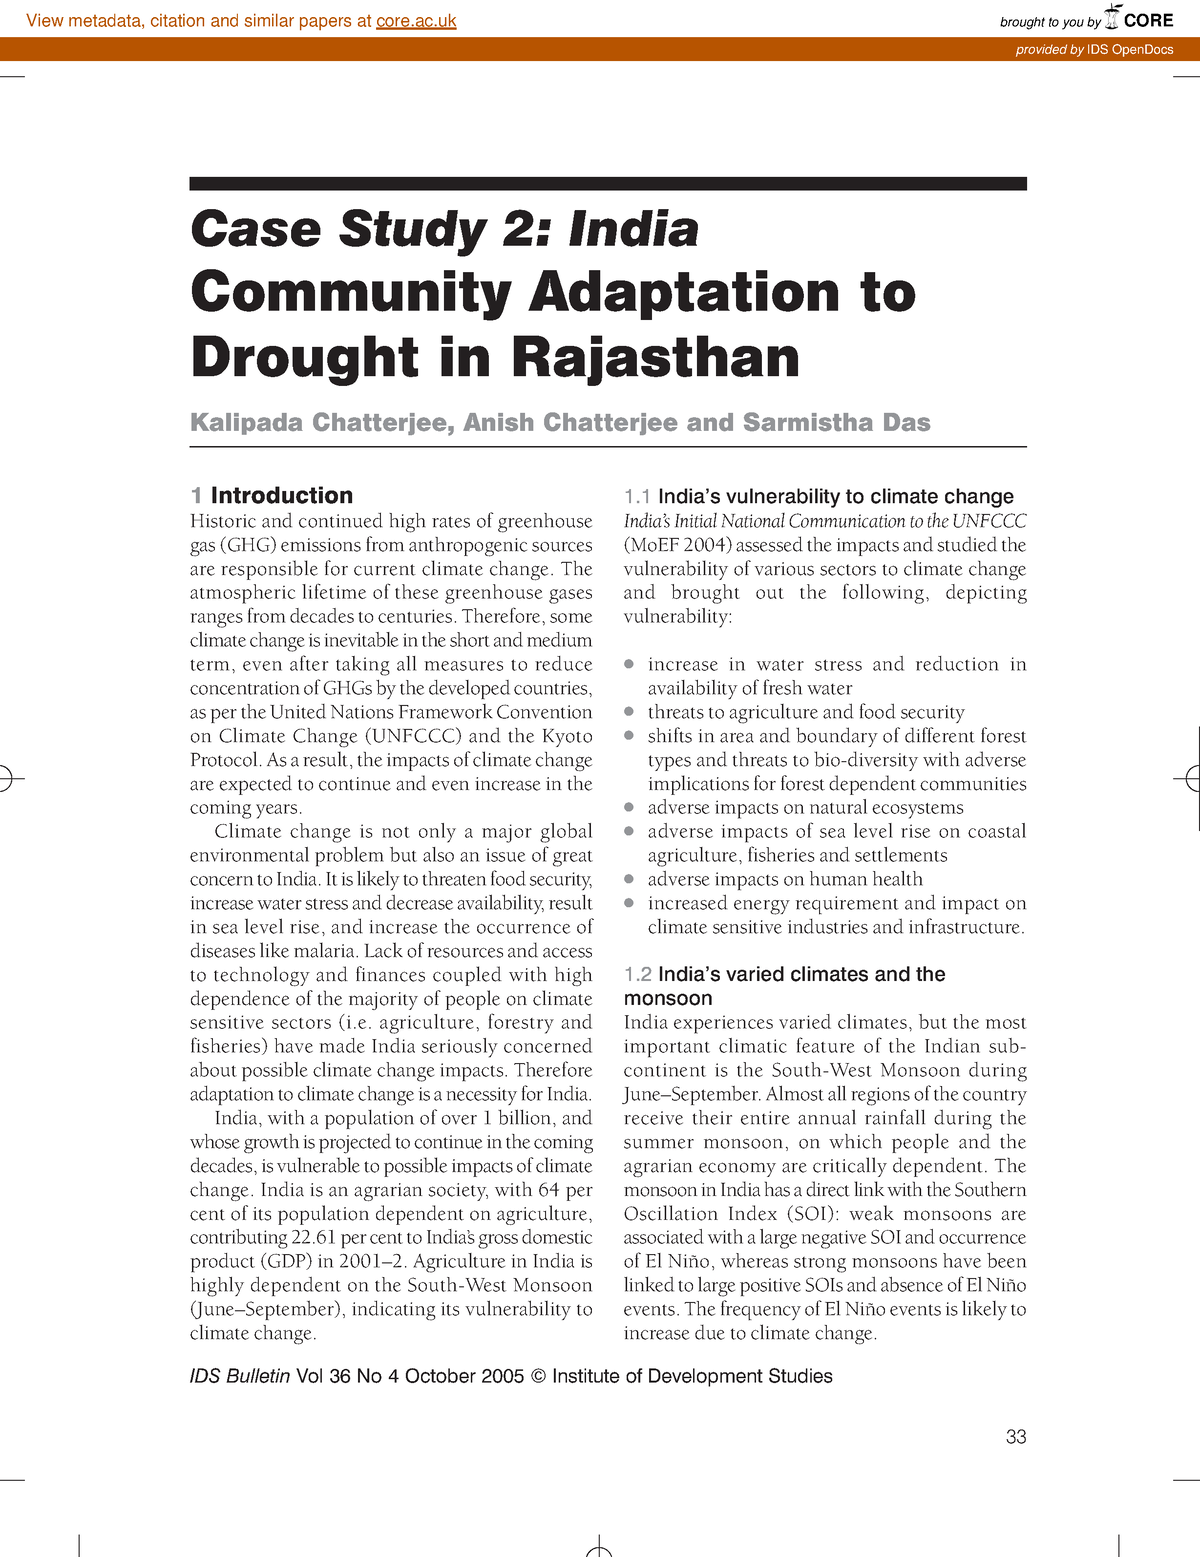 case study of drought in rajasthan